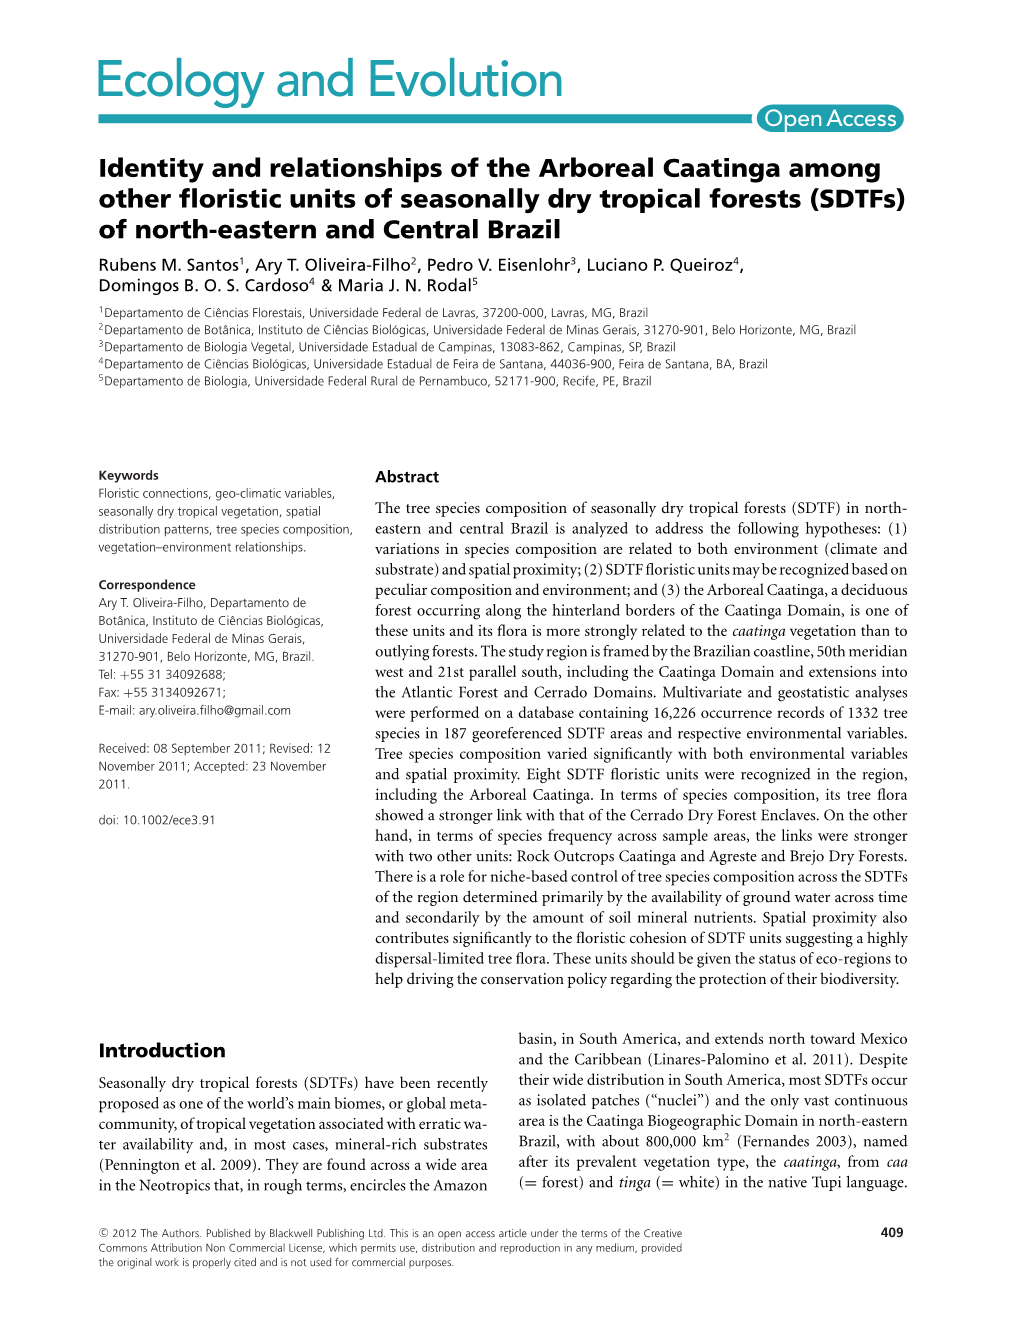 Identity and Relationships of the Arboreal Caatinga Among Other ﬂoristic Units of Seasonally Dry Tropical Forests (Sdtfs) of North-Eastern and Central Brazil Rubens M